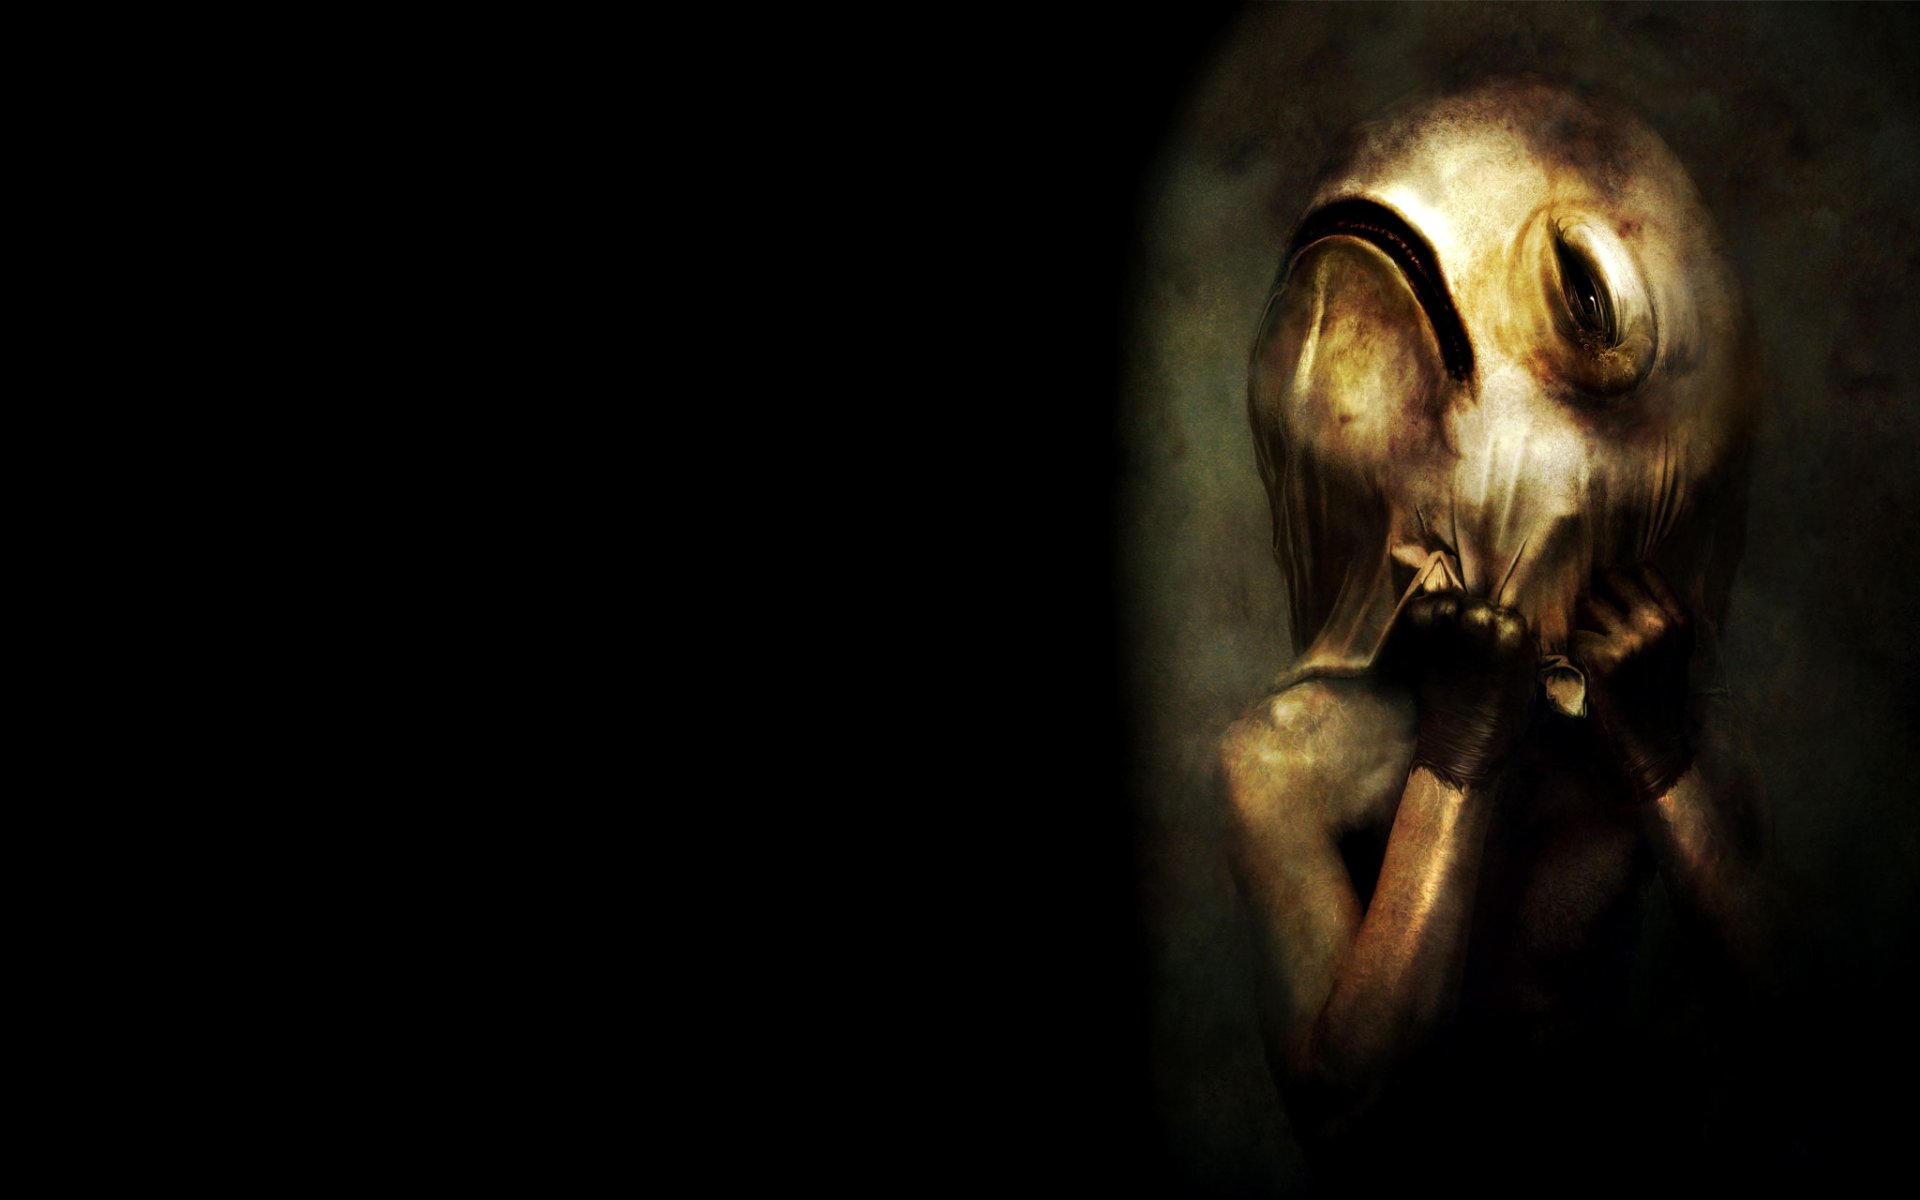 Dark and creepy HD desktop wallpaper featuring a mysterious figure with a distorted, mask-like face, hands clasped in front of it, set against a shadowy background.